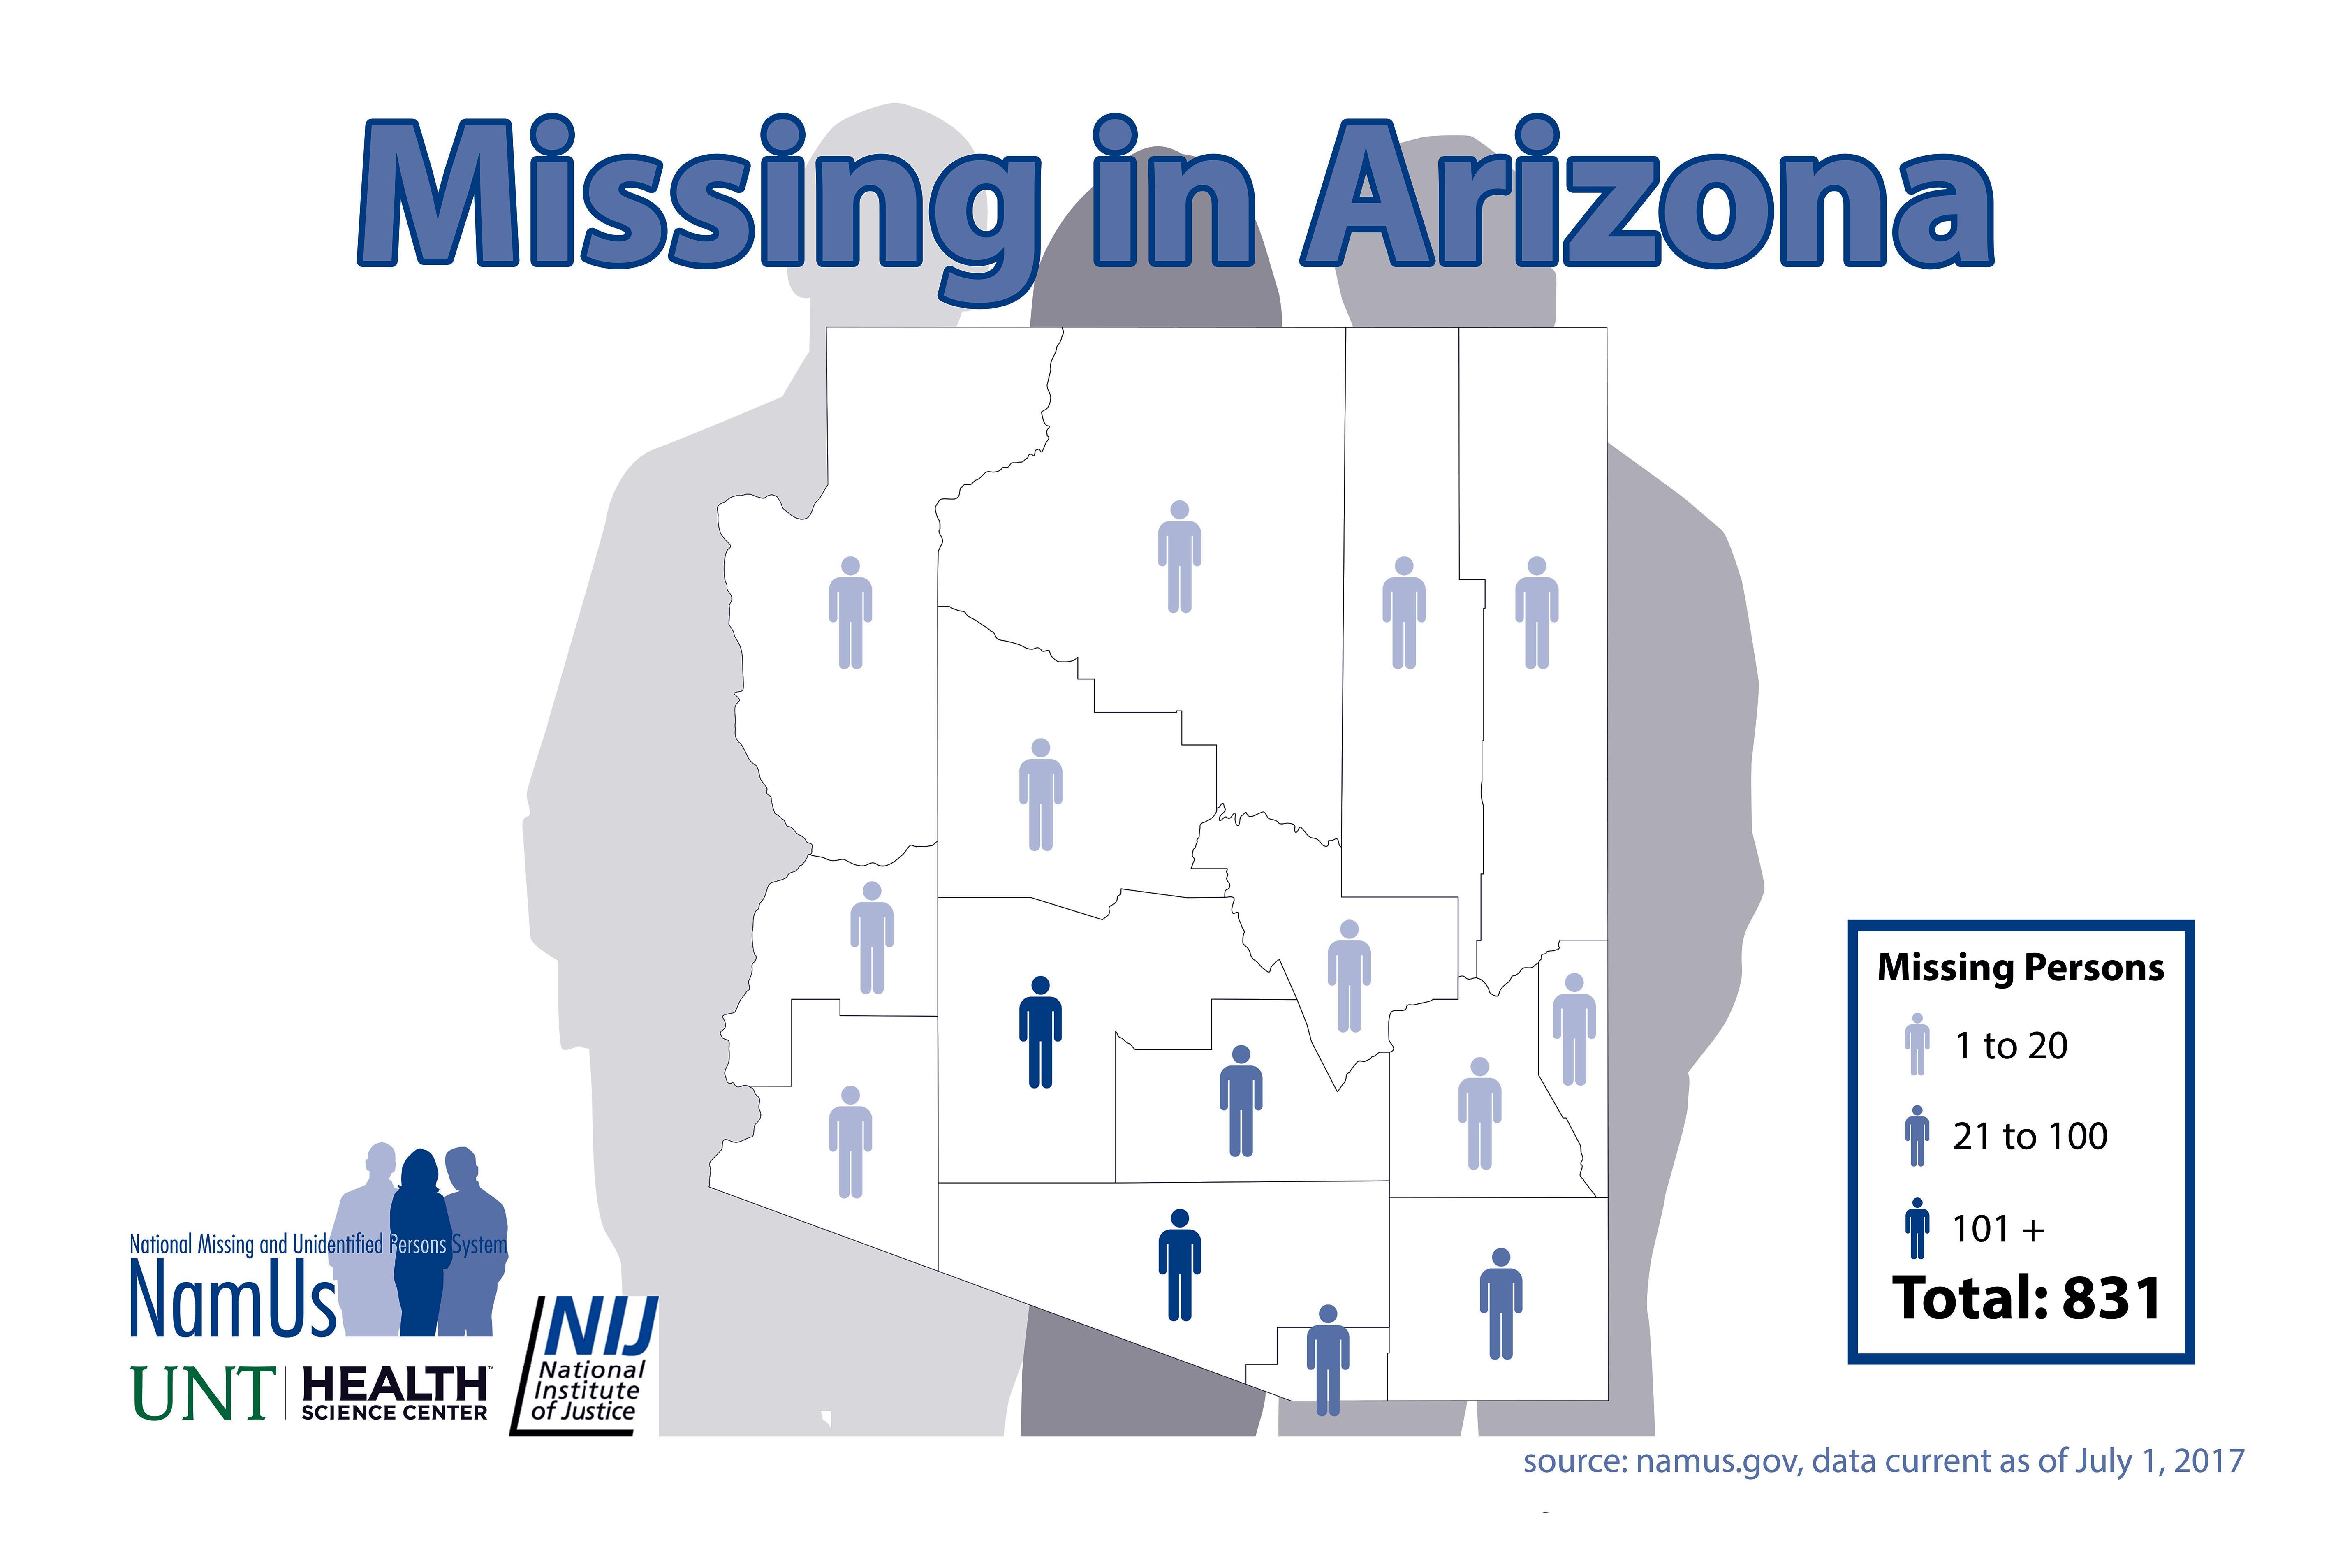 Missing in Arizona Day, Oct. 21, aims to help families find information